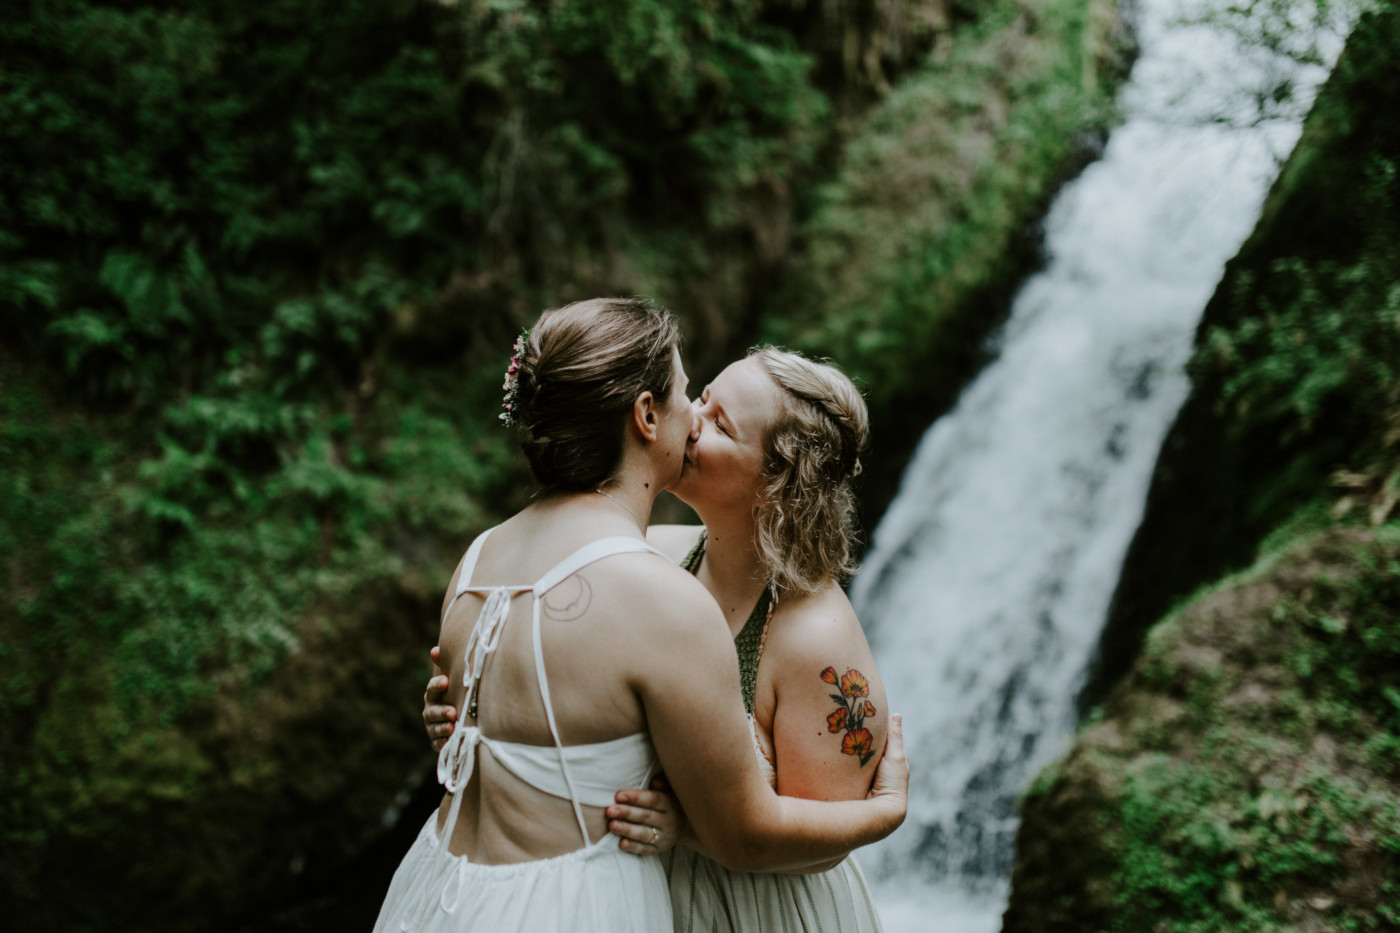 Audrey and Kate's first kiss as bride and bride. Elopement wedding photography at Bridal Veil Falls by Sienna Plus Josh.